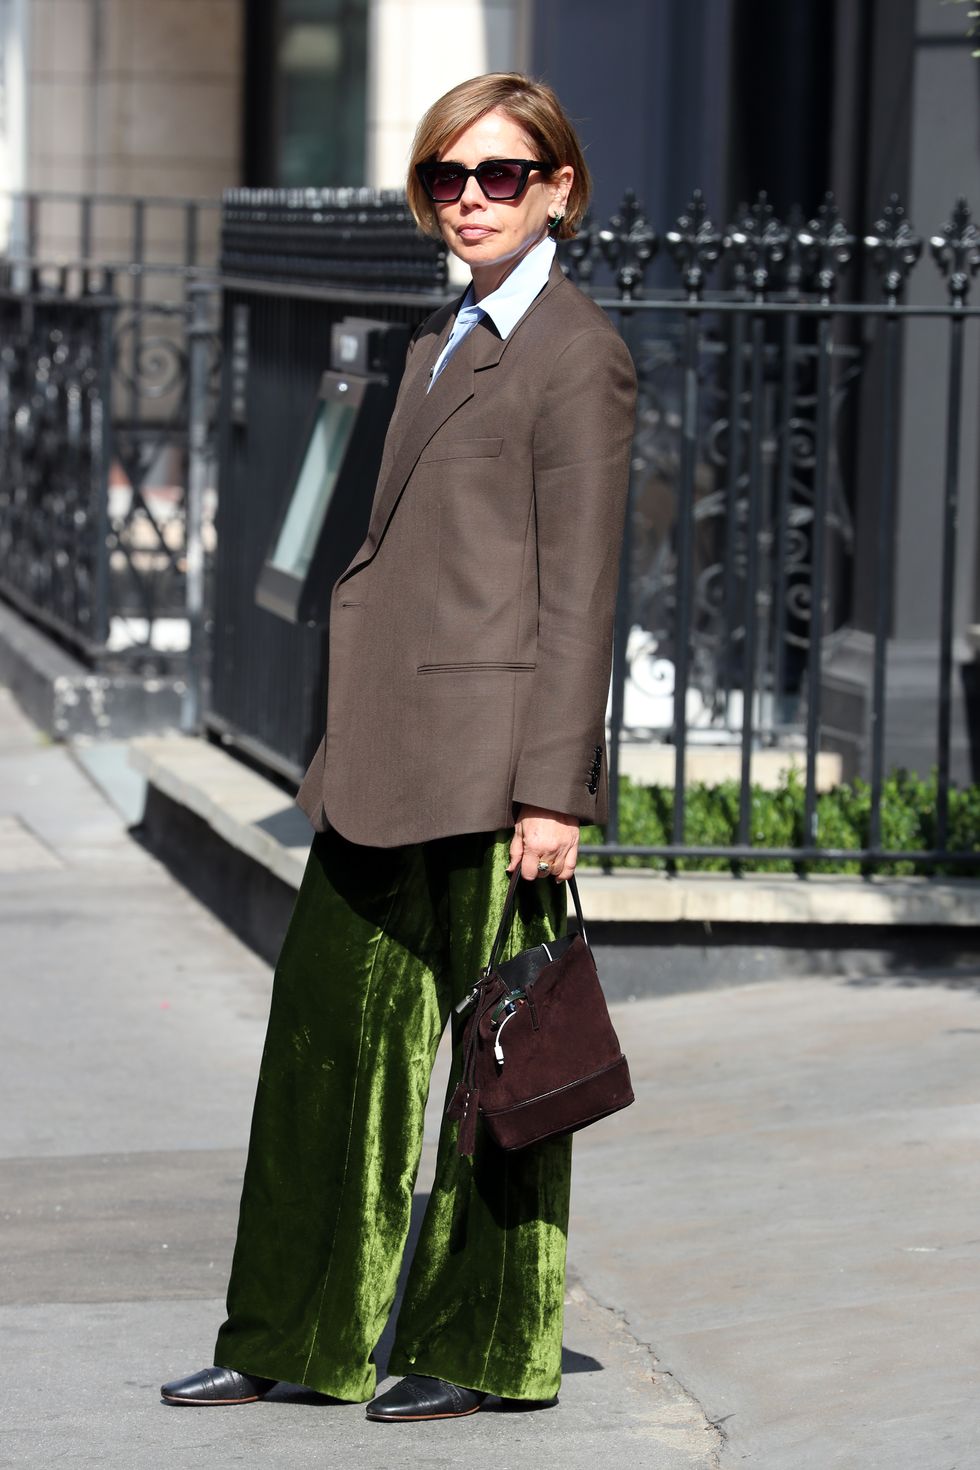 london, england   september 21  guest wearing green velvet trousers, suit jacket, sunglasses attends a osman presentation at the mandrake hotel on september 21, 2020 in london, england photo by neil mockfordgetty images